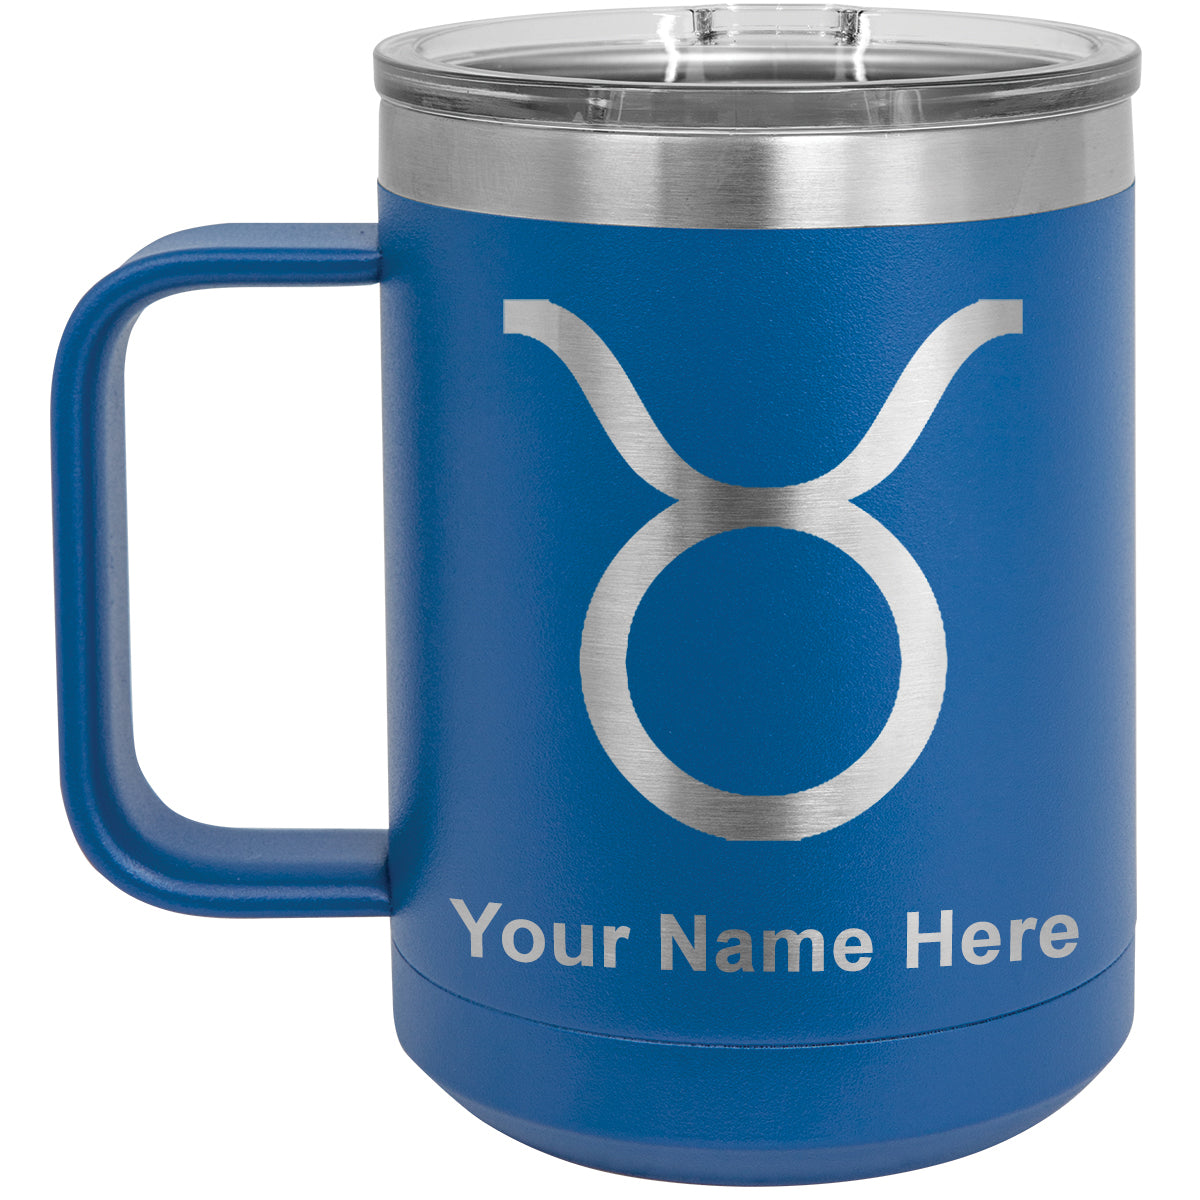 15oz Vacuum Insulated Coffee Mug, Zodiac Sign Taurus, Personalized Engraving Included